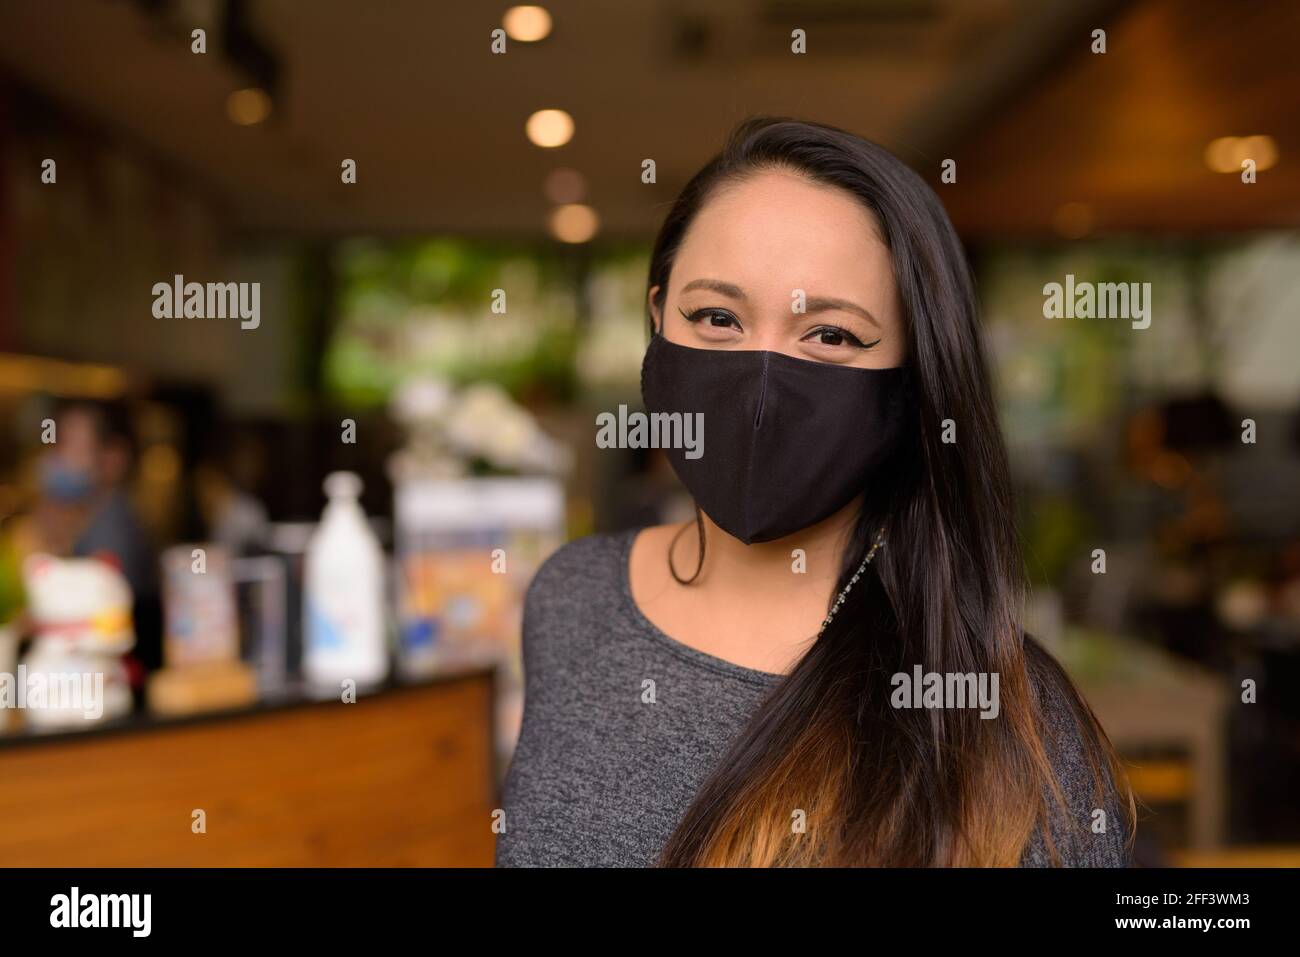 Face of woman wearing medical face mask for protection against coronavirus Covid-19 Stock Photo